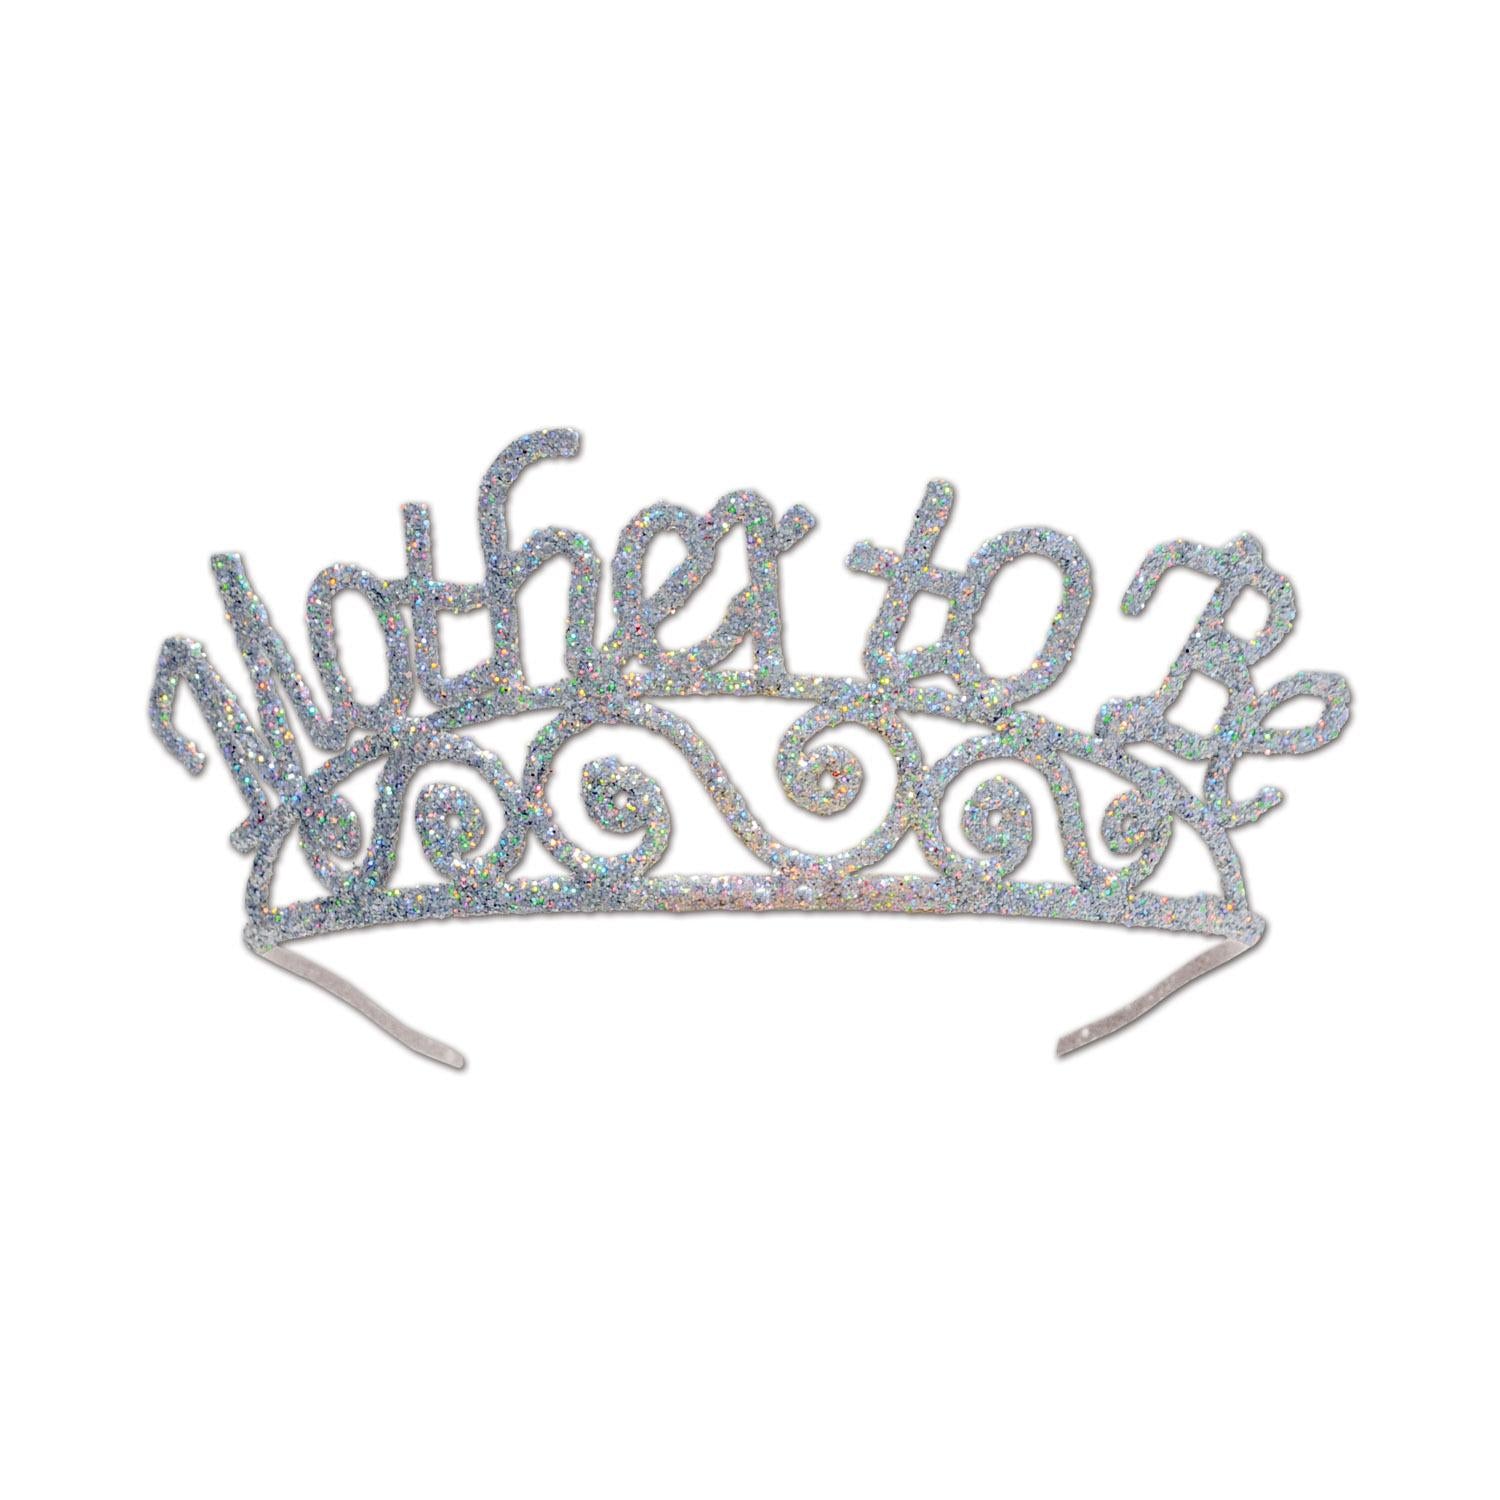 Beistle Glittered Metal Mother To Be Tiara